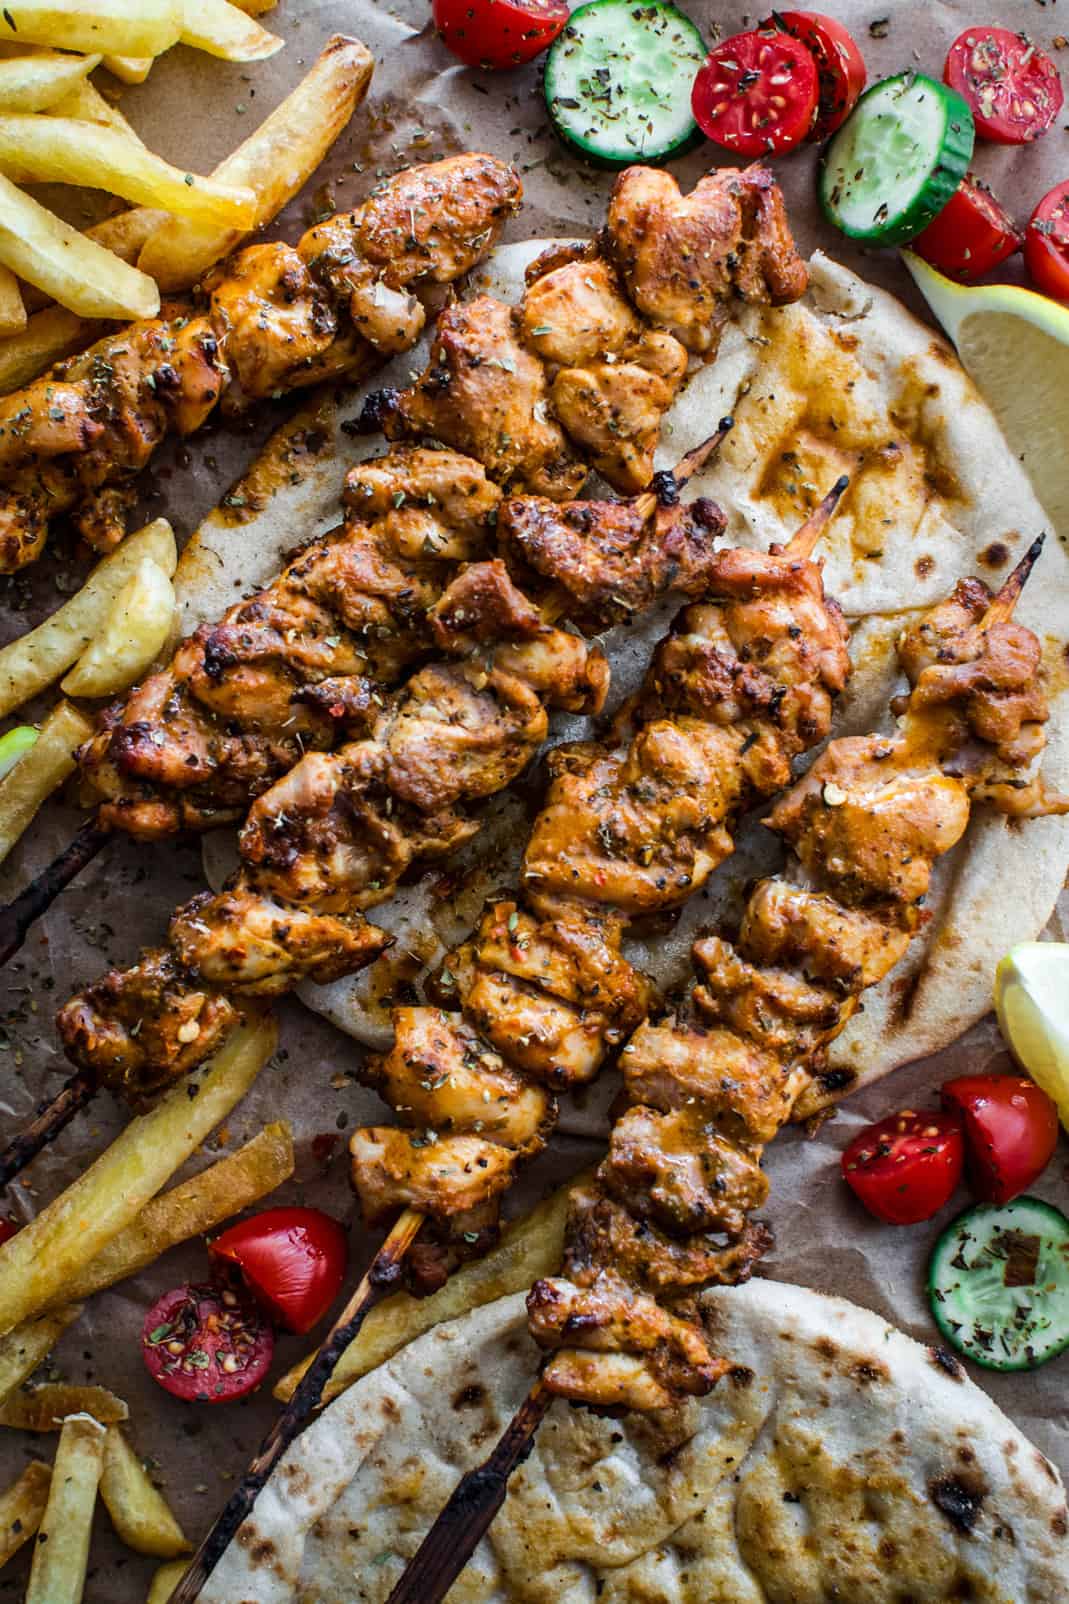 Chicken thigh skewers on pita, cherry tomatoes, sliced cucumber, fries and lemon wedges on parchment paper.